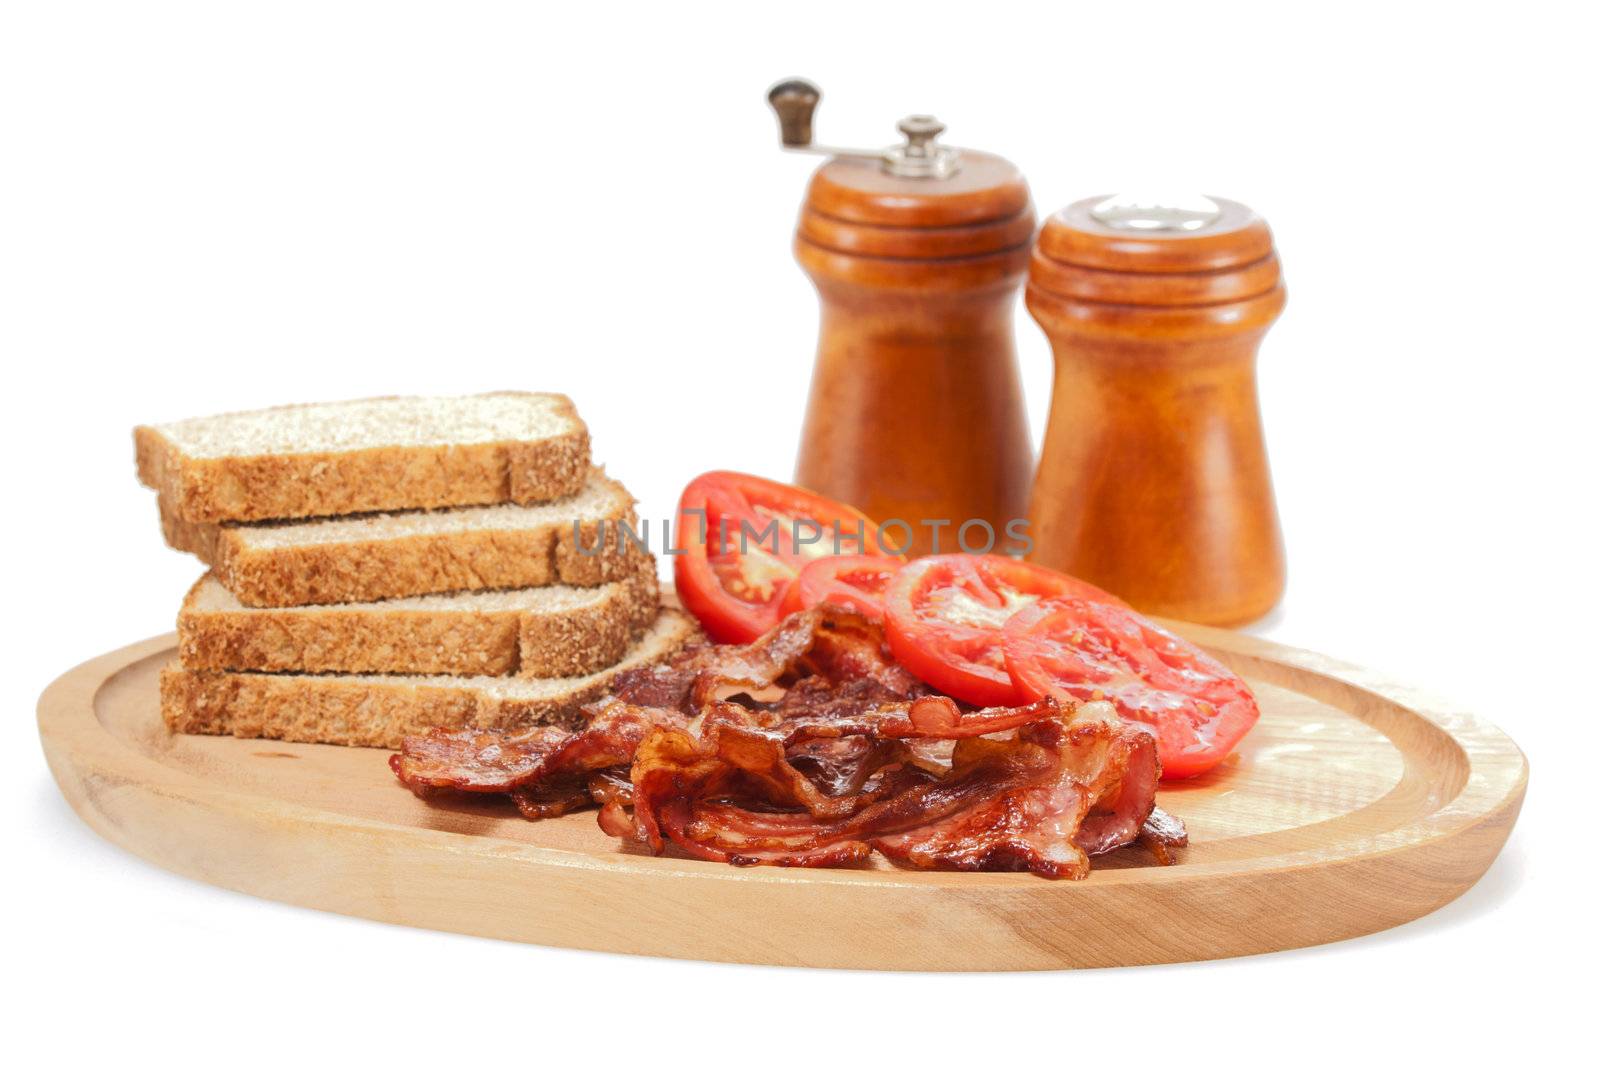 Platter of cooked bacon and fresh tomatoes on a white background.